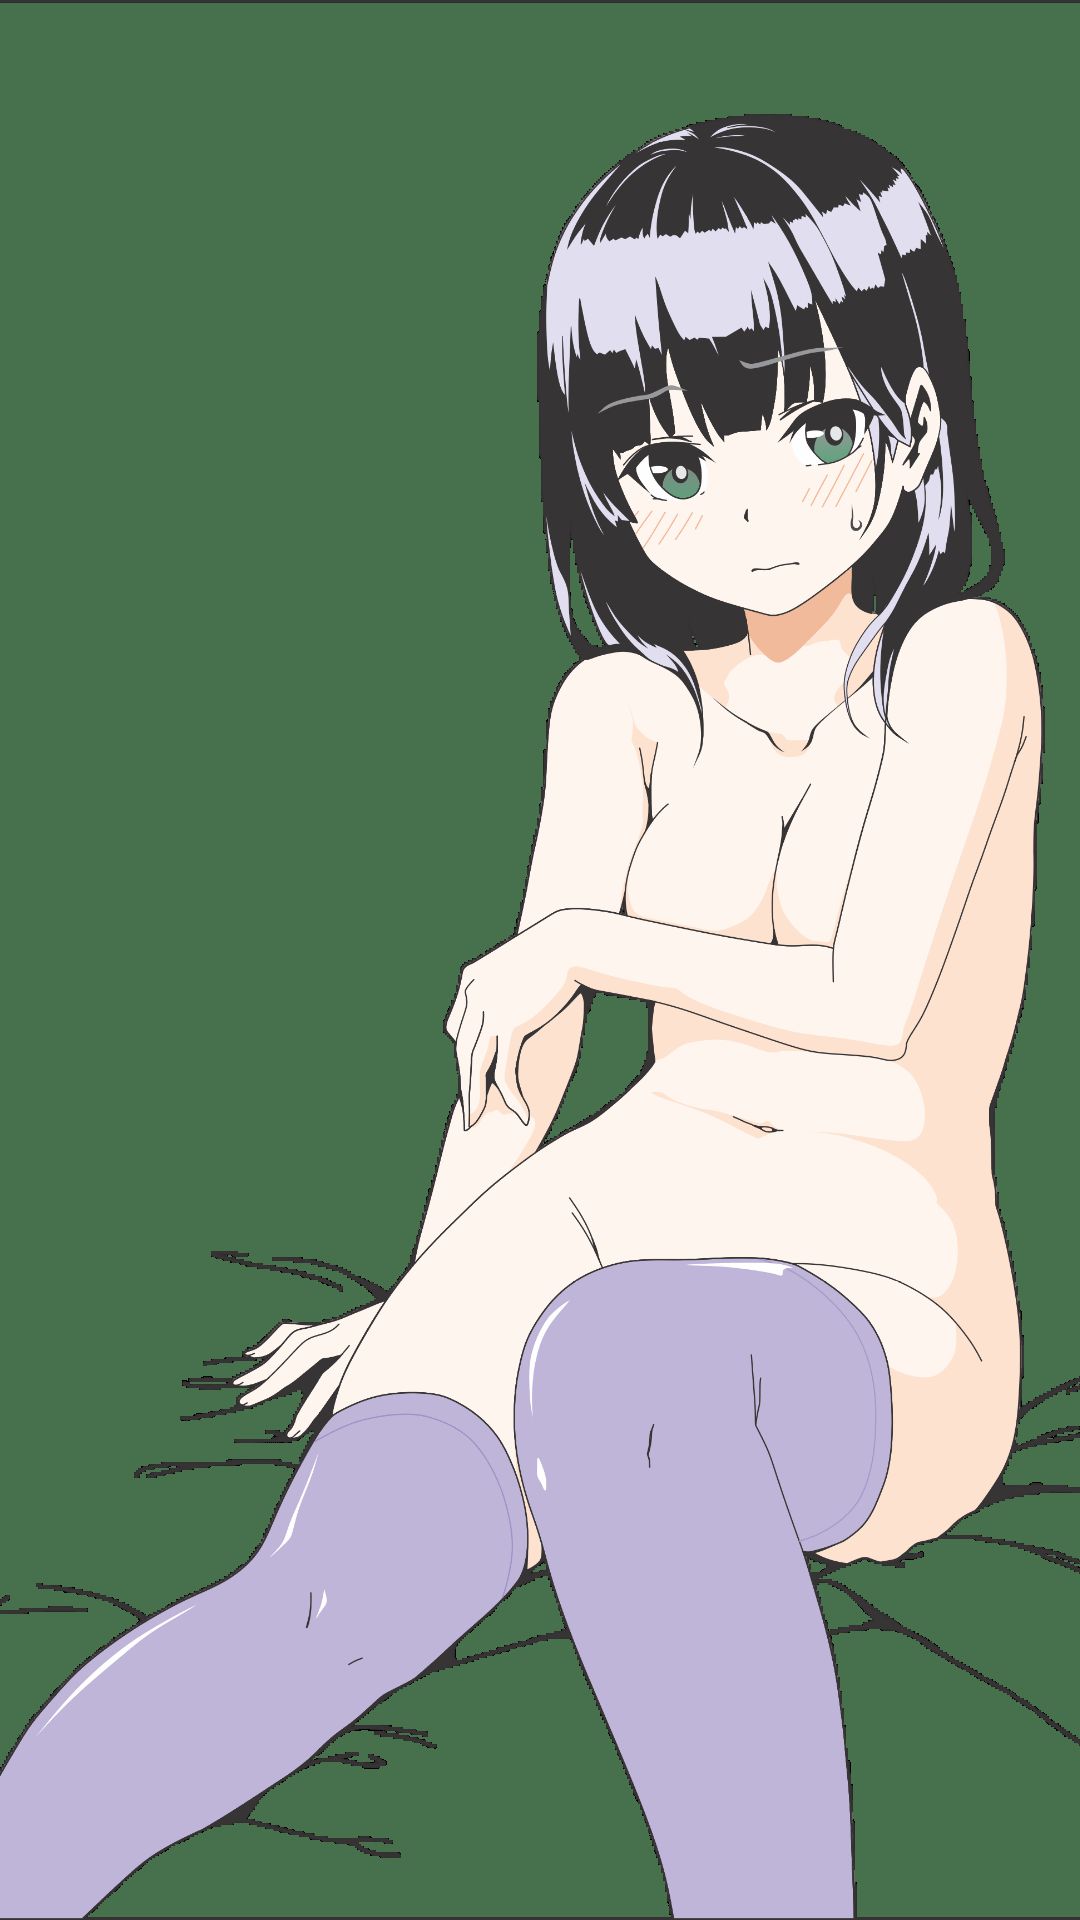 [Anime character material] png background of animated characters erotic images that 161 44